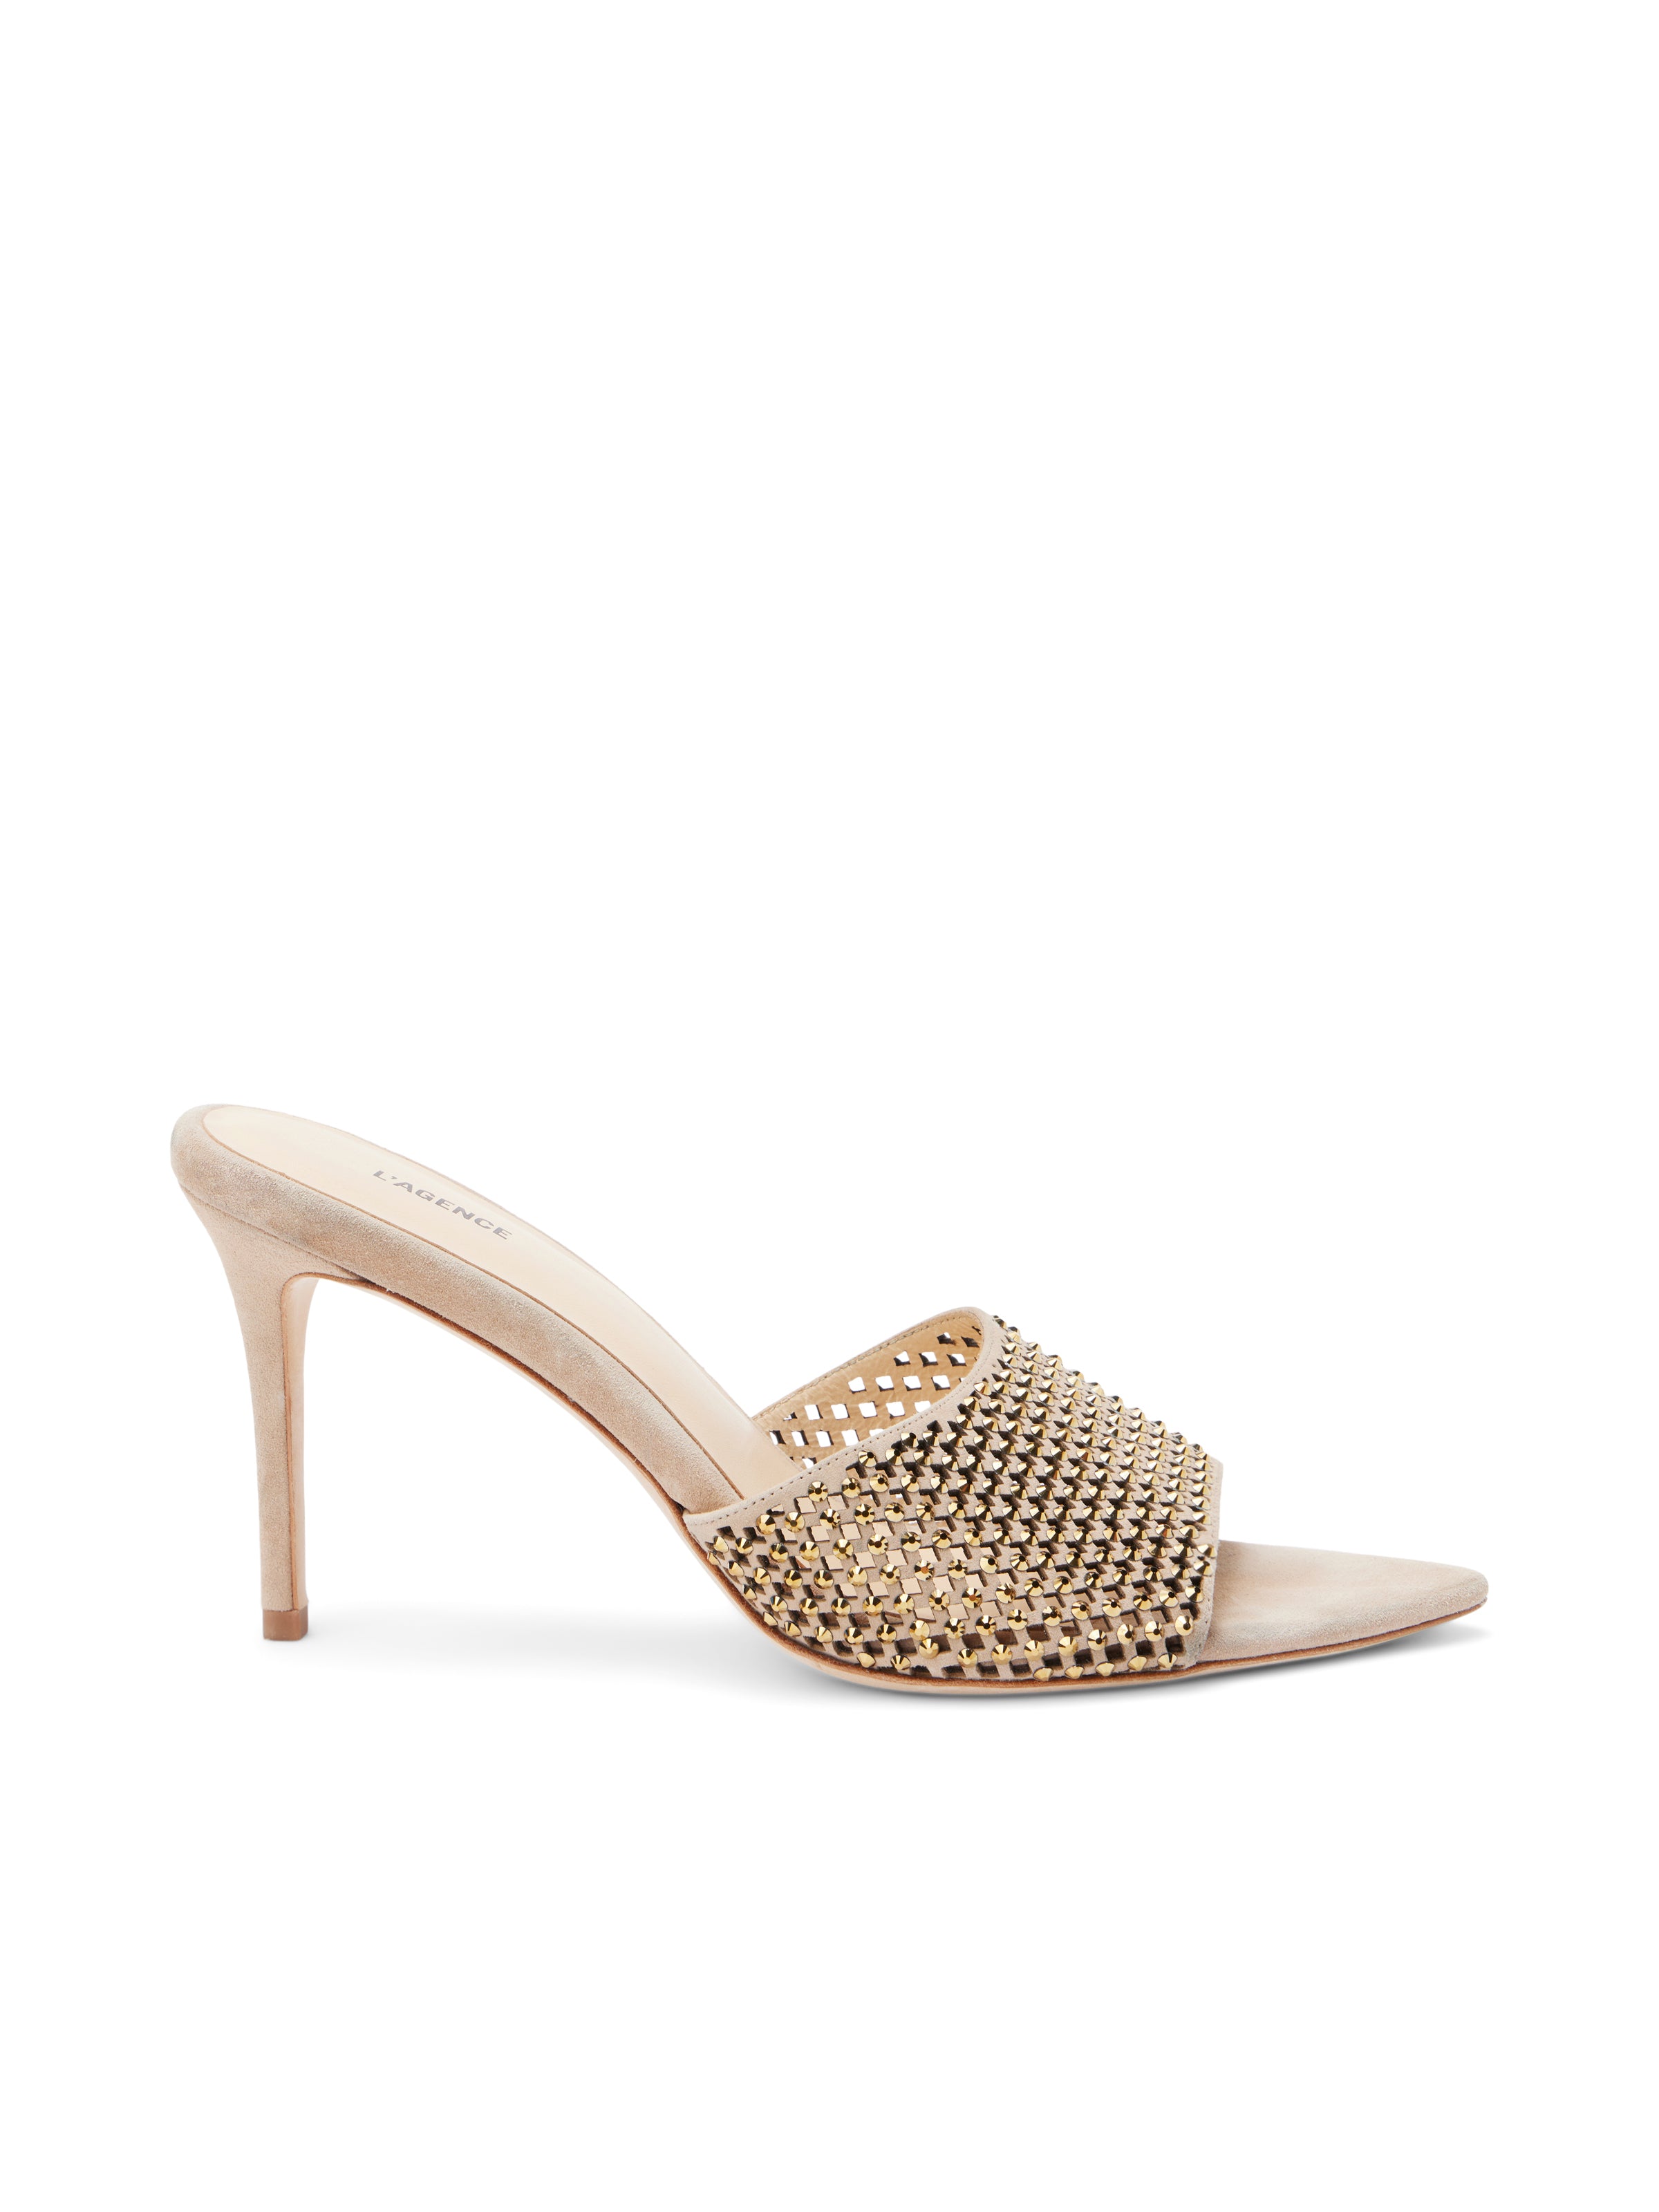 Featured: Narcise Open Toe Mule